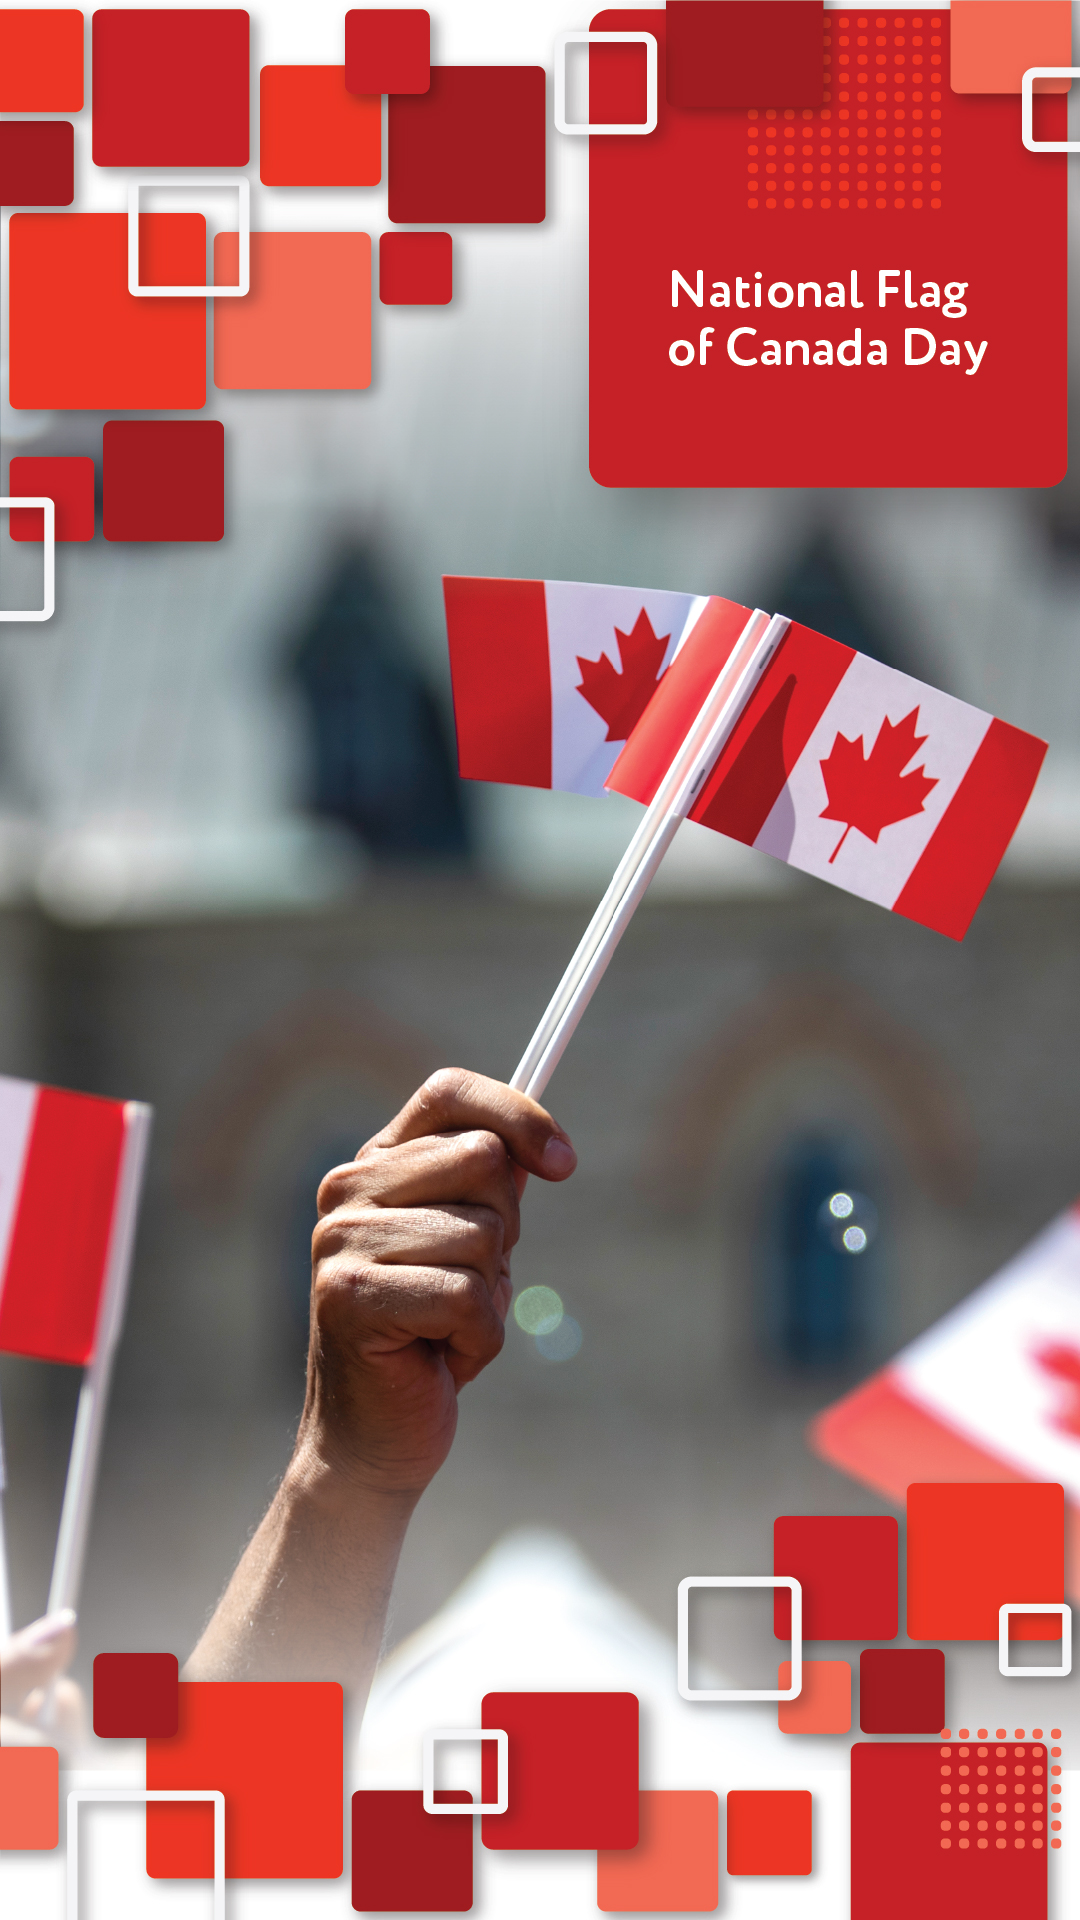 National Flag of Canada Day toolkit — February 15 Canada.ca